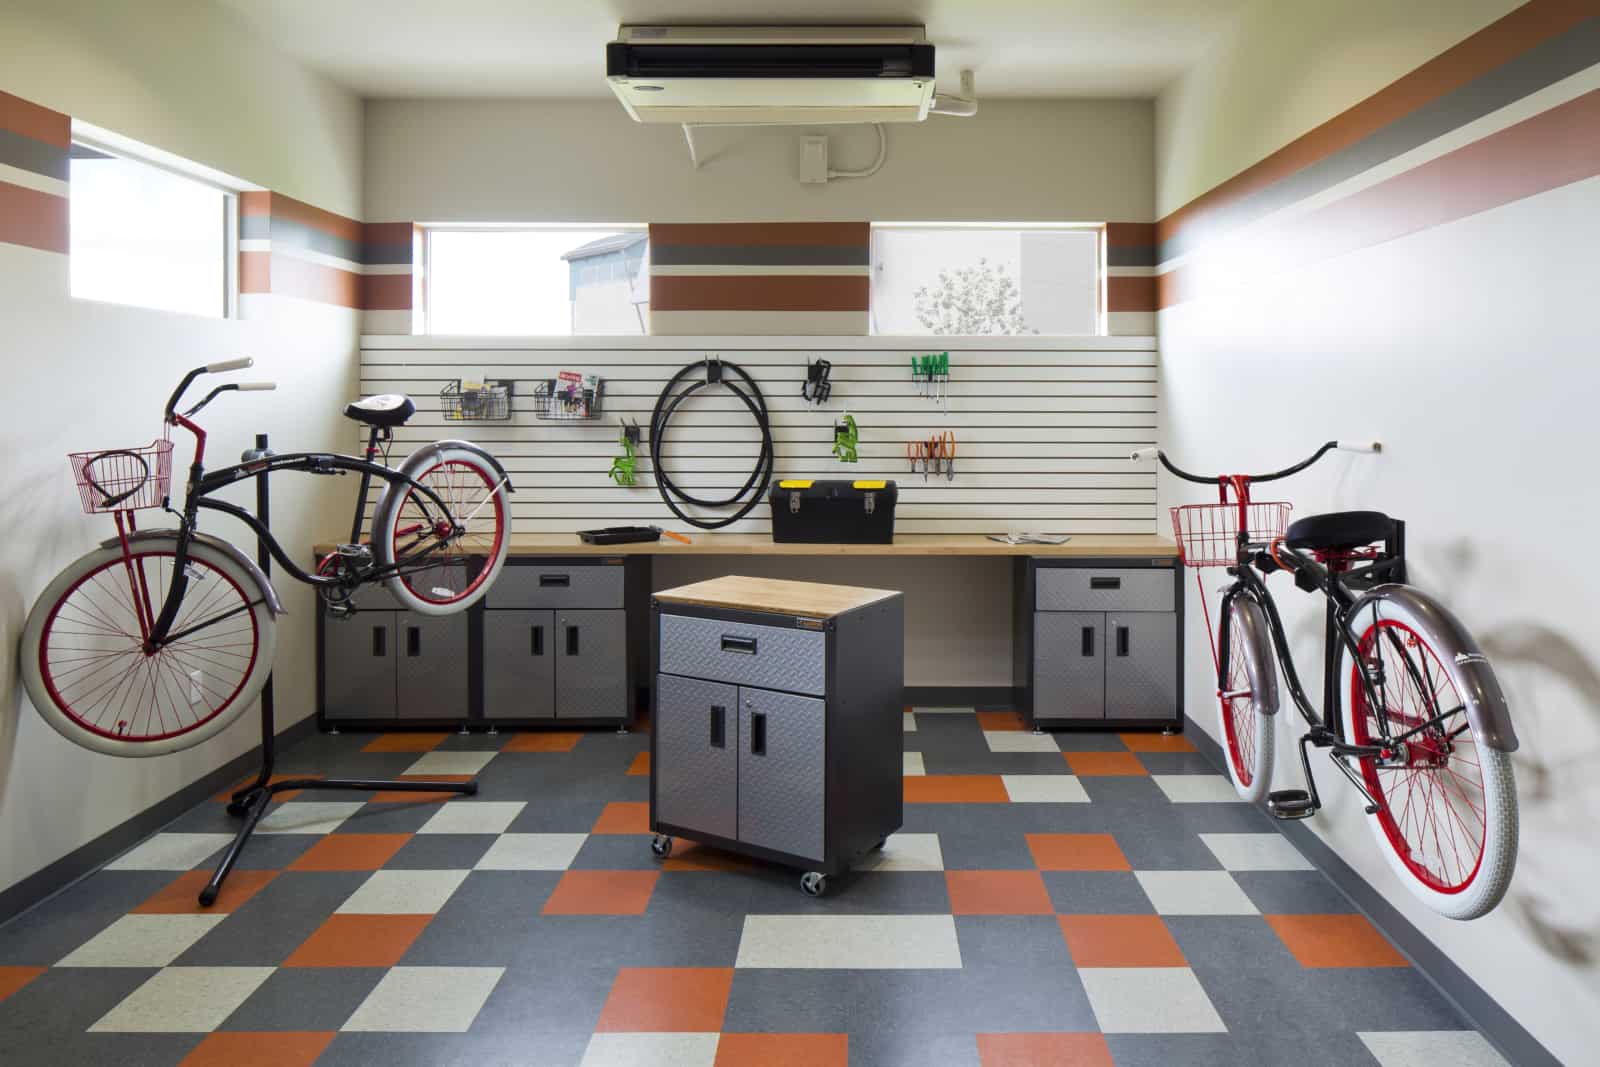 Interior of a bike repair room with workbench, tool cabinets, various tools and two bikes on stands.